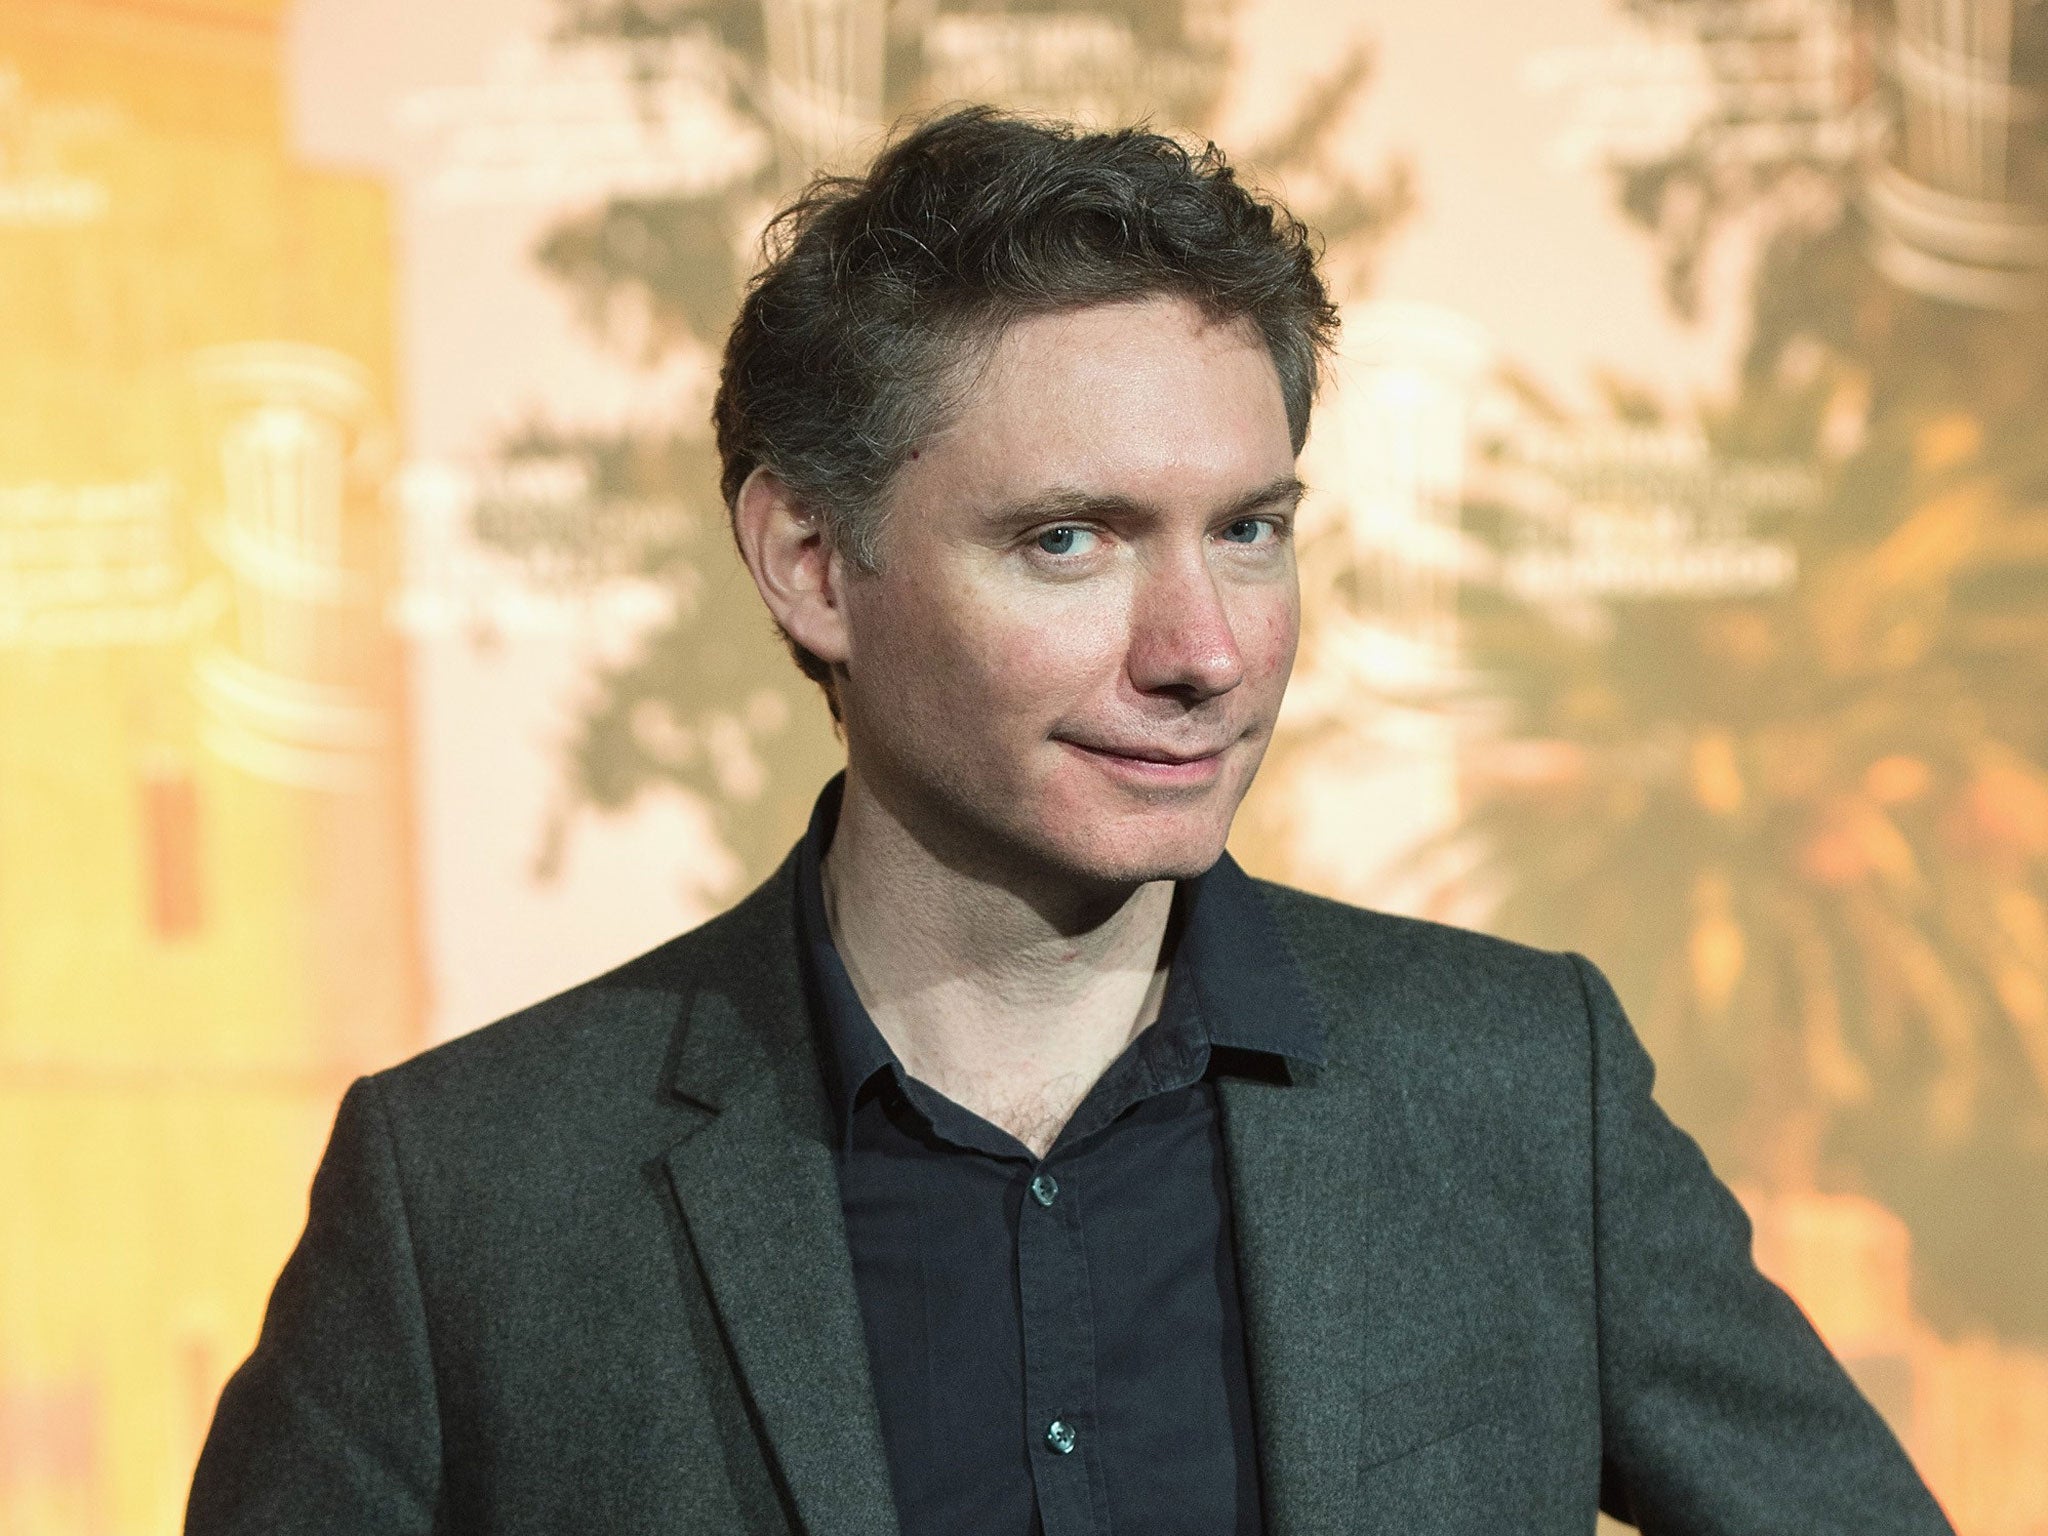 Director Kevin Macdonald has slammed literary fiction for being too dull